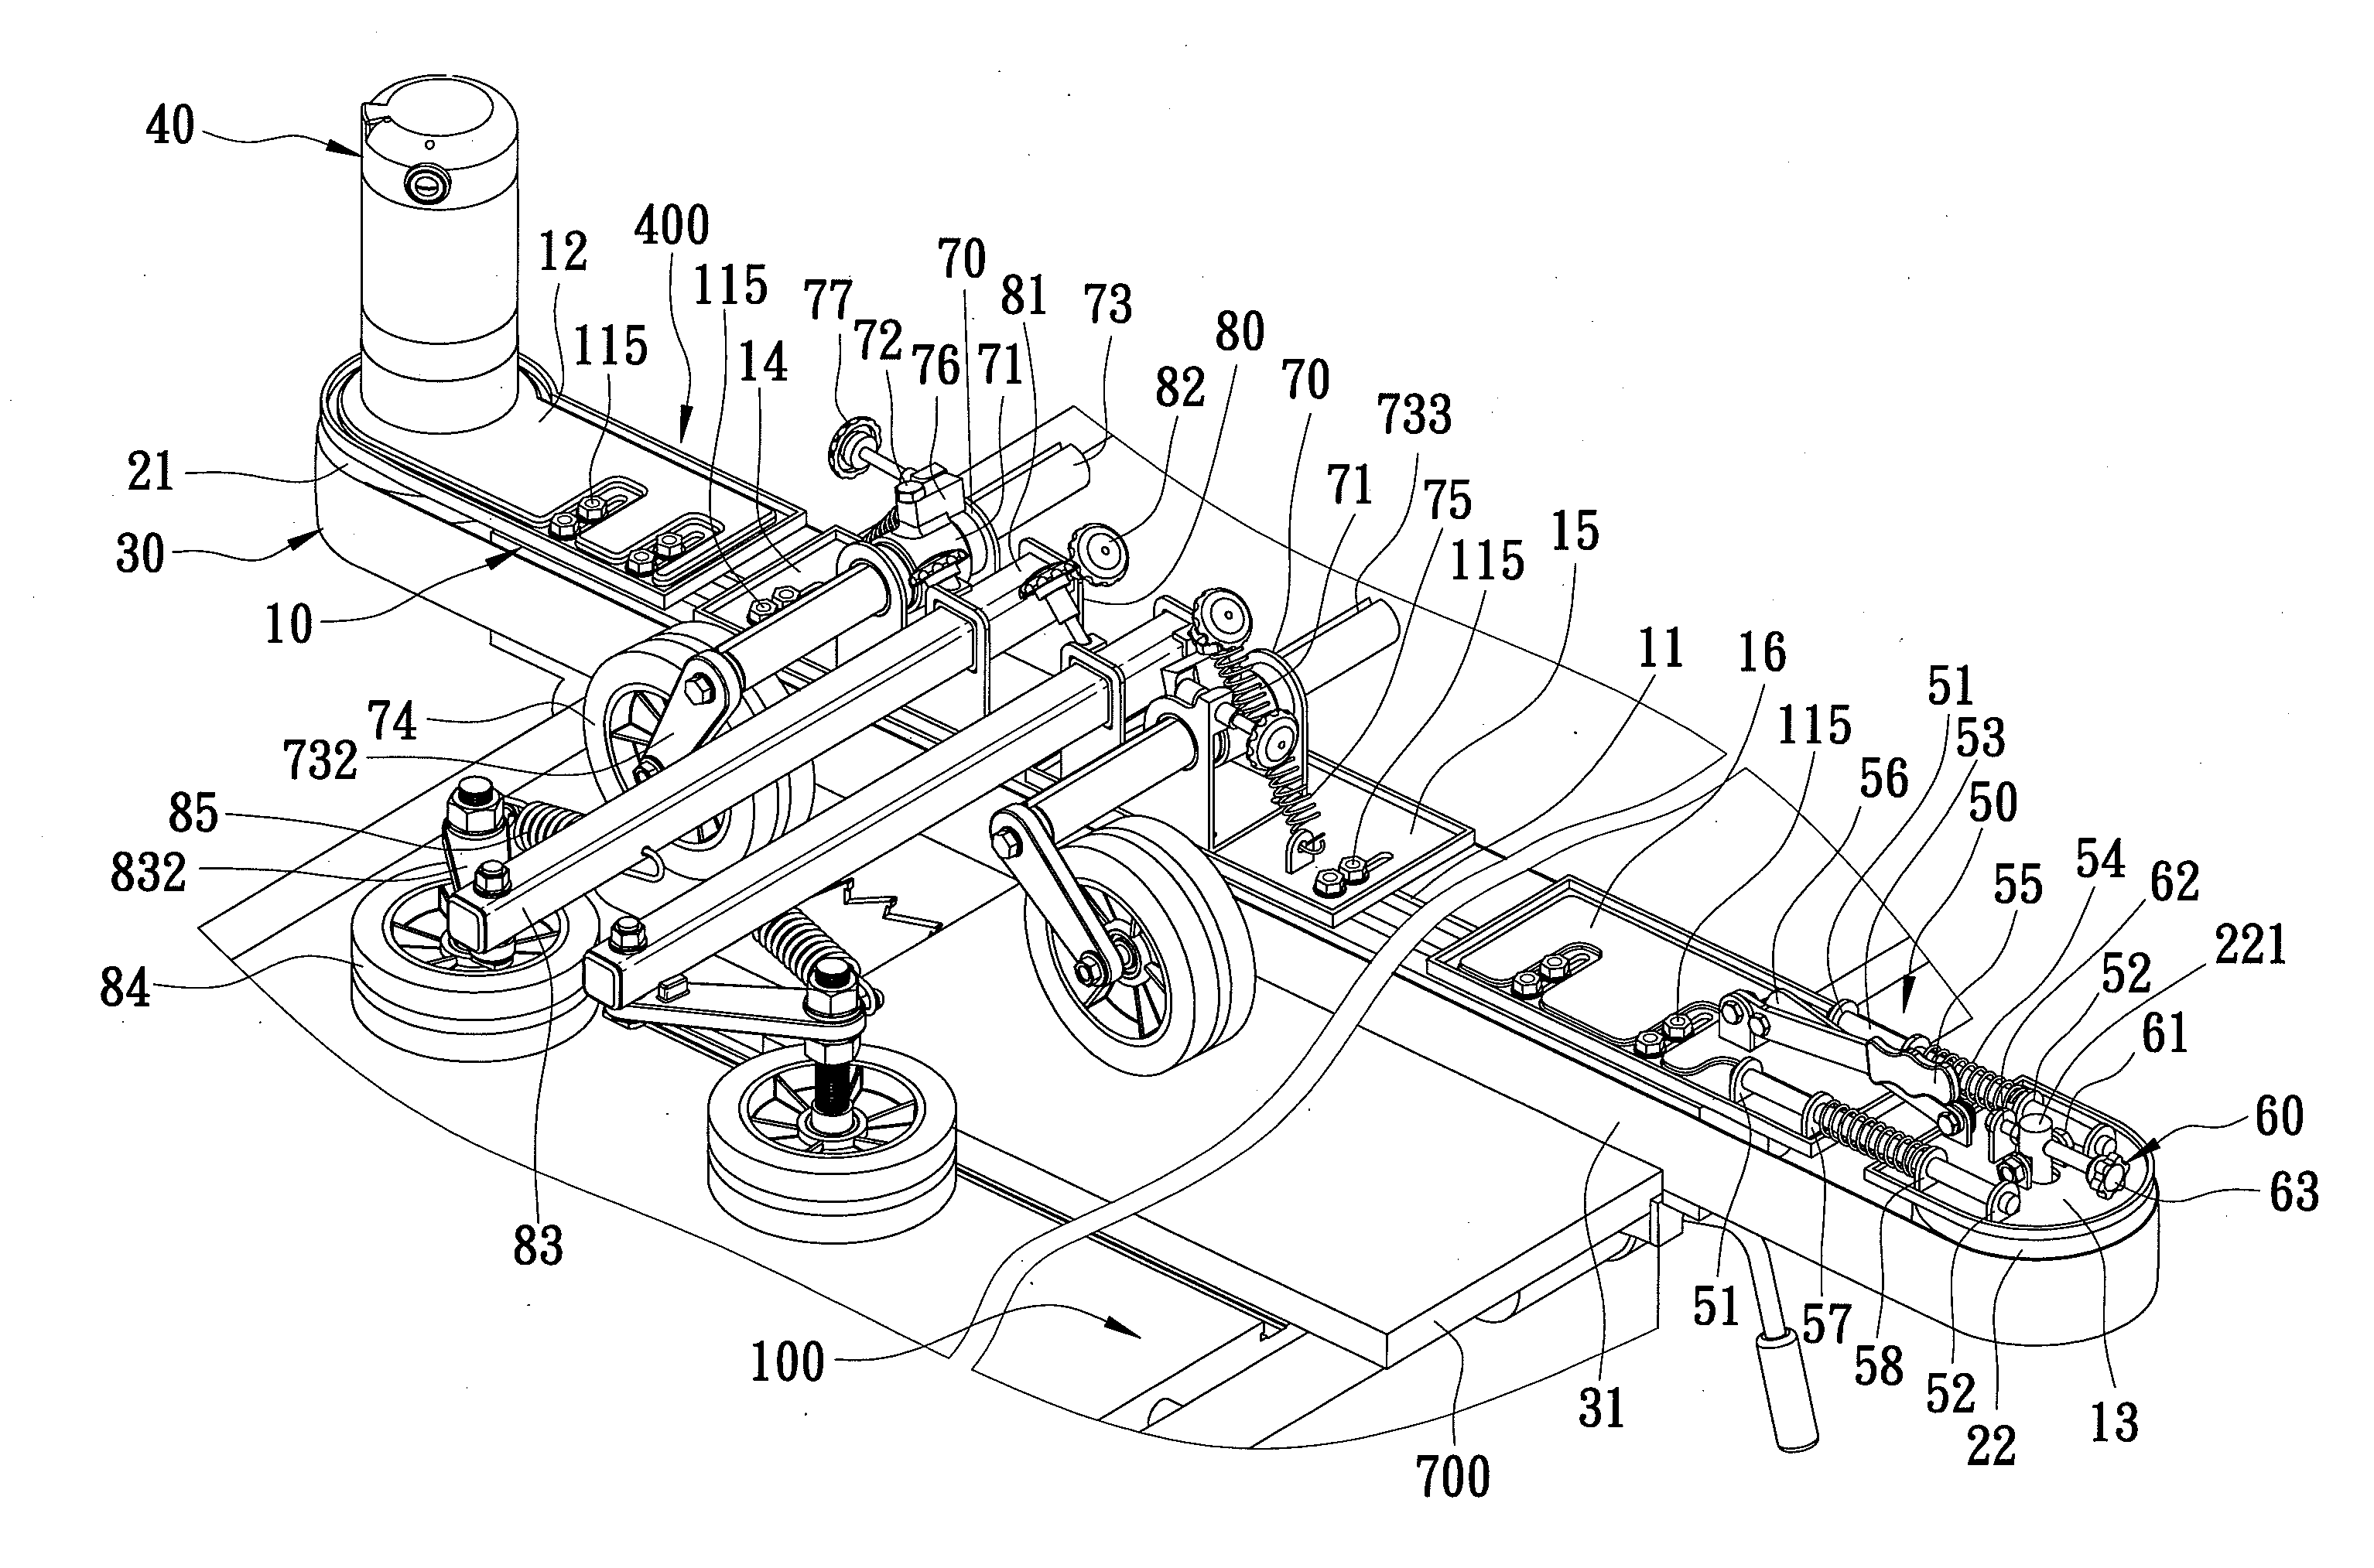 Workpiece-Advancing Device for a Wood Cutting Apparatus